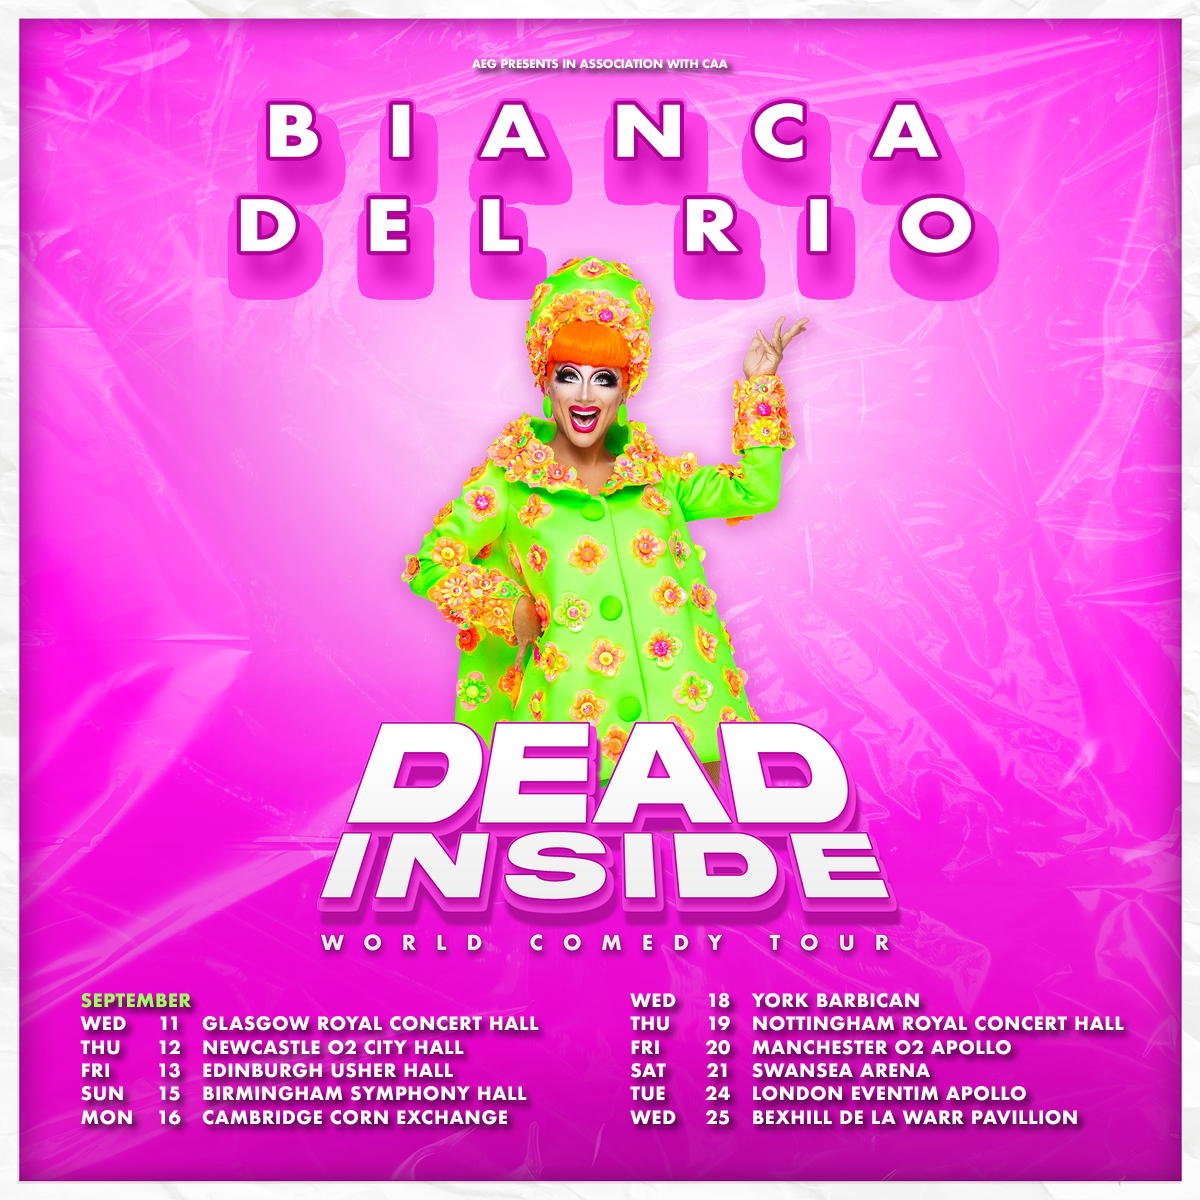 🆕 Comedy queen and RuPaul’s Drag Race champion @TheBiancaDelRio brings her stand-up comedy tour #DeadInside to @yorkbarbican! 🎟️ Tickets available from 10AM Tuesday 14 May. yorkbarbican.co.uk/whats-on/bianc… #York #YorkBarbican @thisisyo1